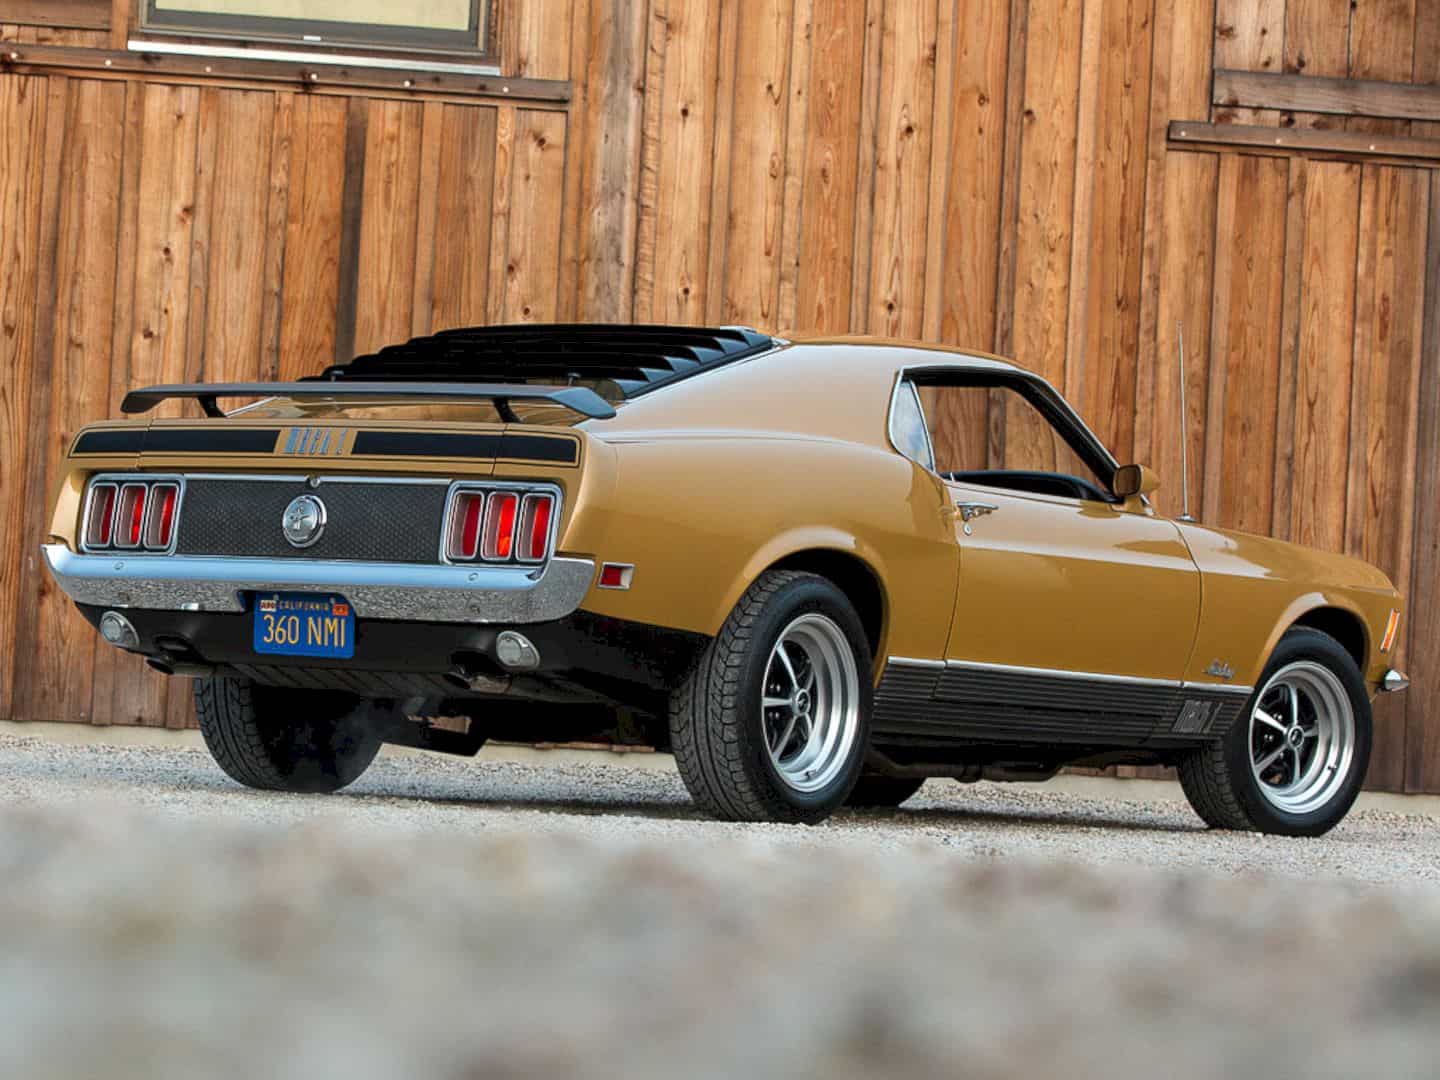 1970 Ford Mustang Mach 1 By Corvette Mike 6